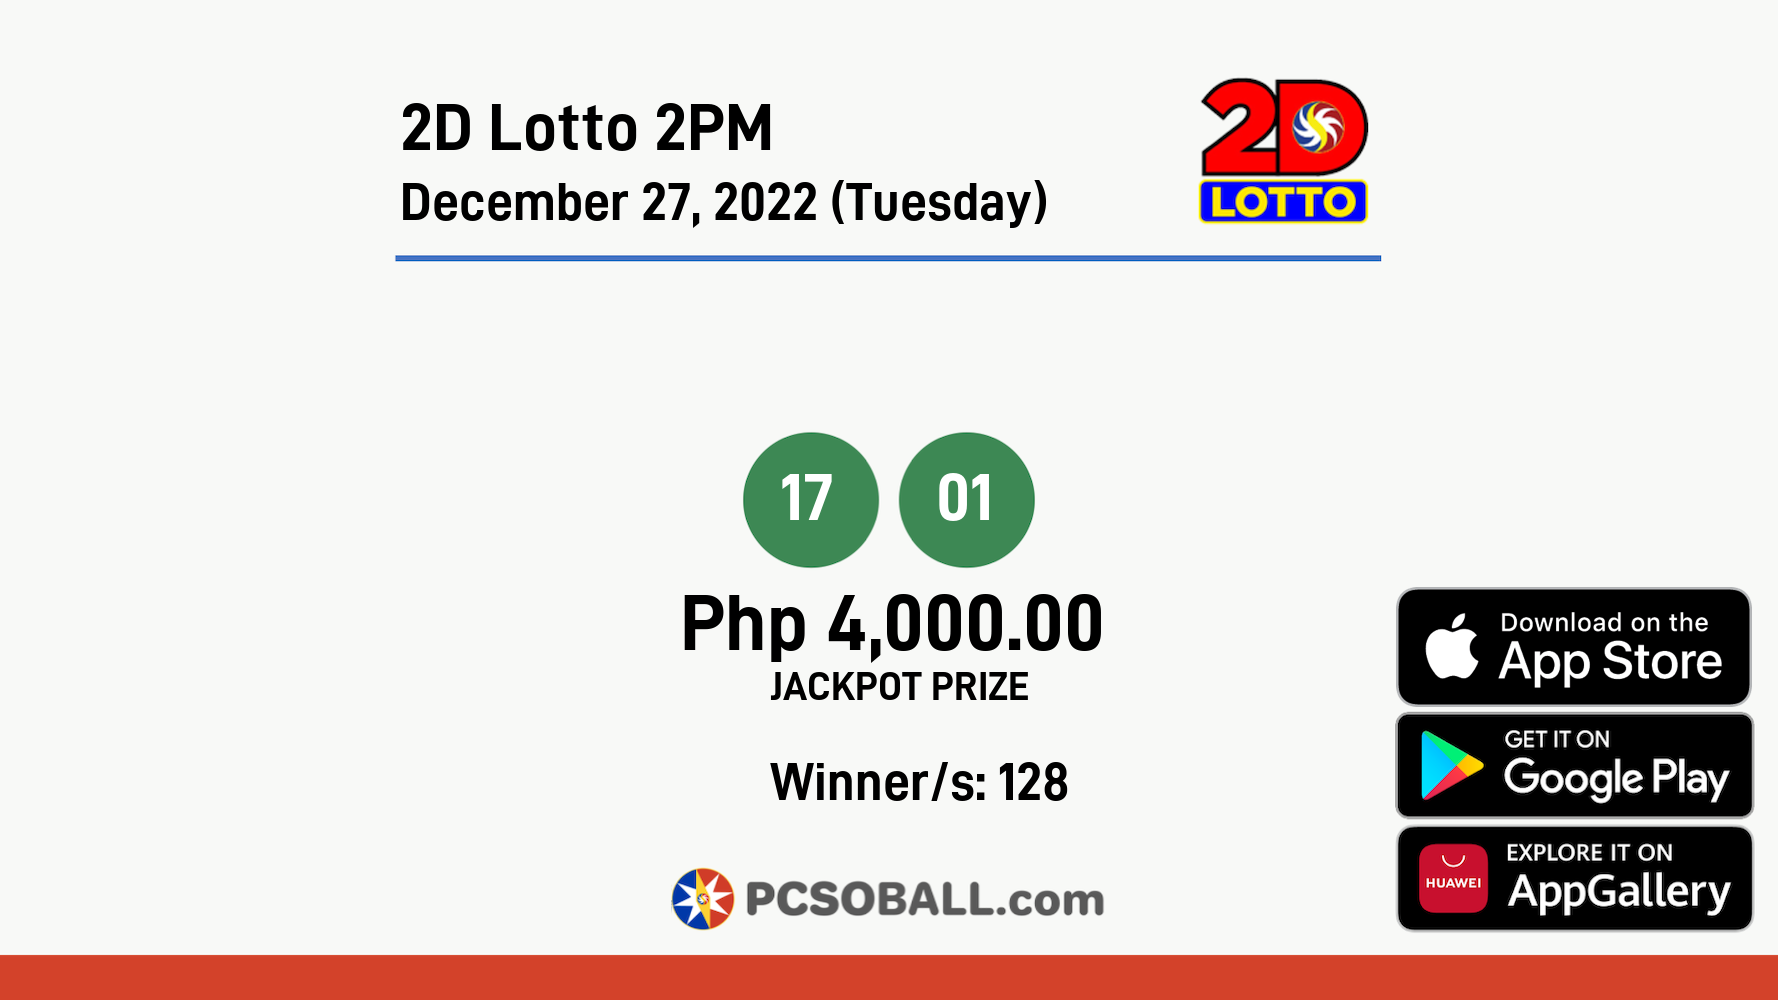 2D Lotto 2PM December 27, 2022 (Tuesday) Result